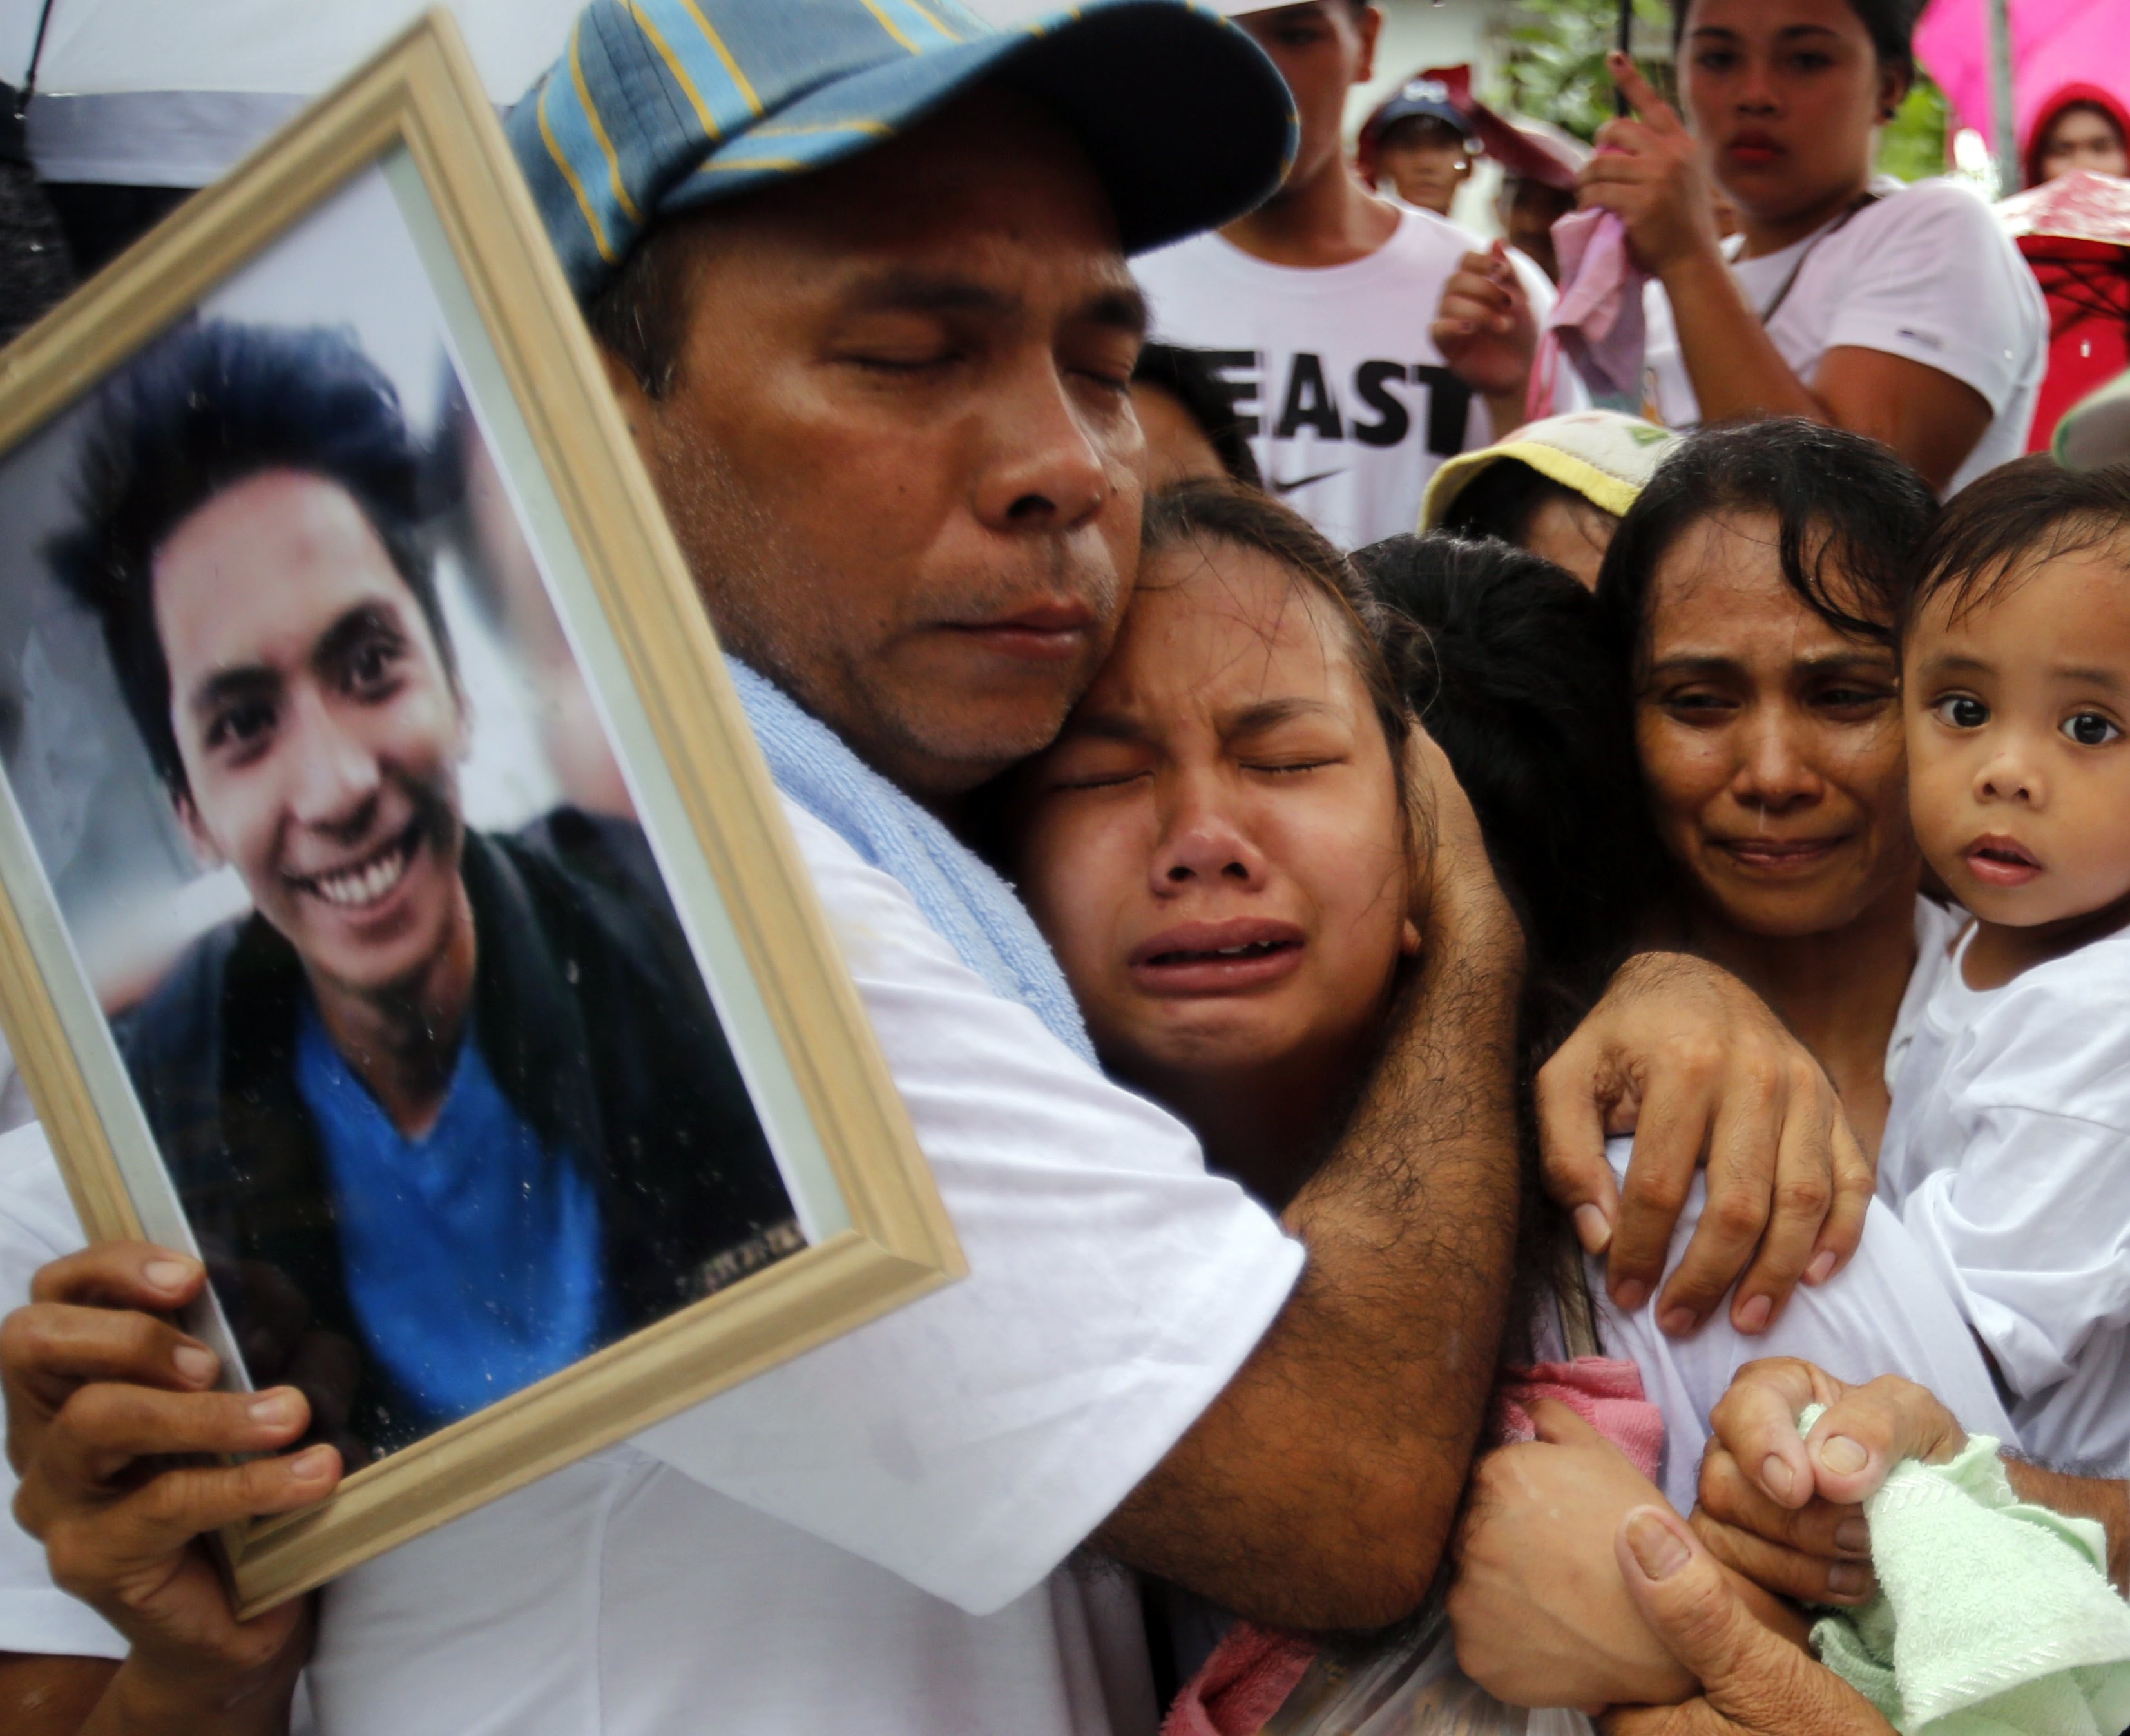 The family of Ephraim Escudero, a victim of extrajudicial killing in the Philippines, mourn during his burial at a cemetery in San Pedro city on September 30. President Rodrigo Duterte's war on drugs has killed more than 7,000 people since his election last summer, with polling showing most of the public believe the police have carried out extrajudicial killings. Photo: EPA-EFE